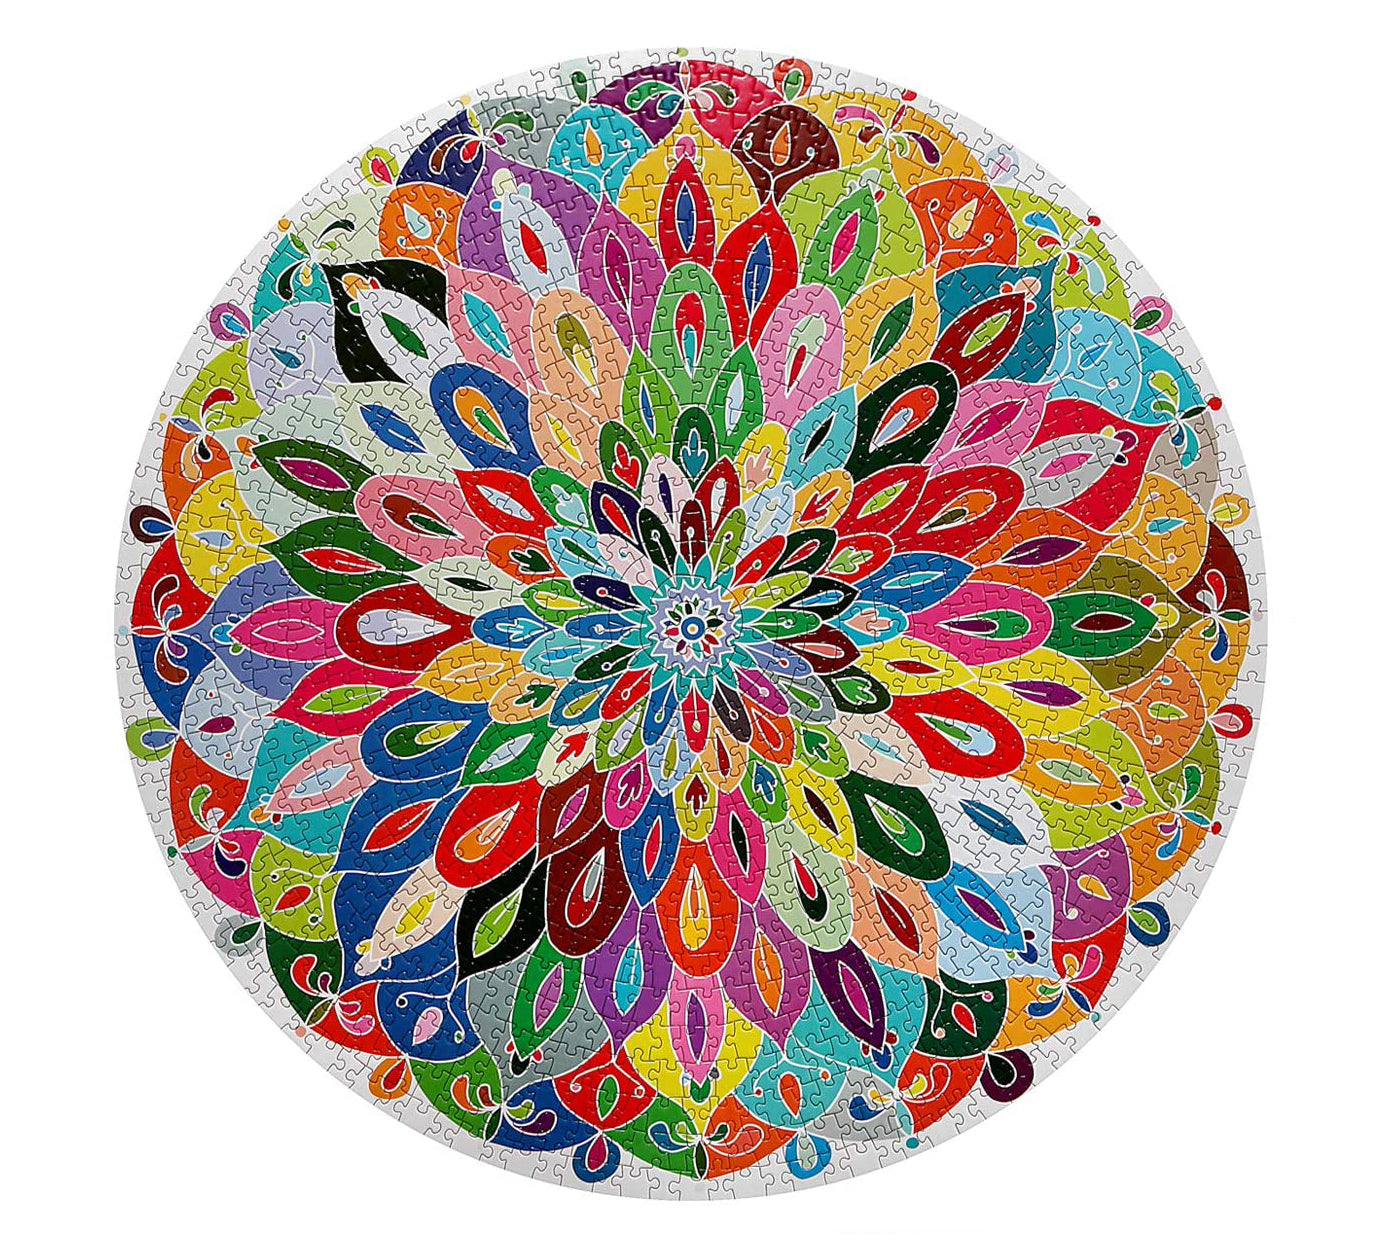 We love this adult jigsaw puzzle! The round colourful mandala can offer positivity and mindfulness, providing the perfect relaxation source.